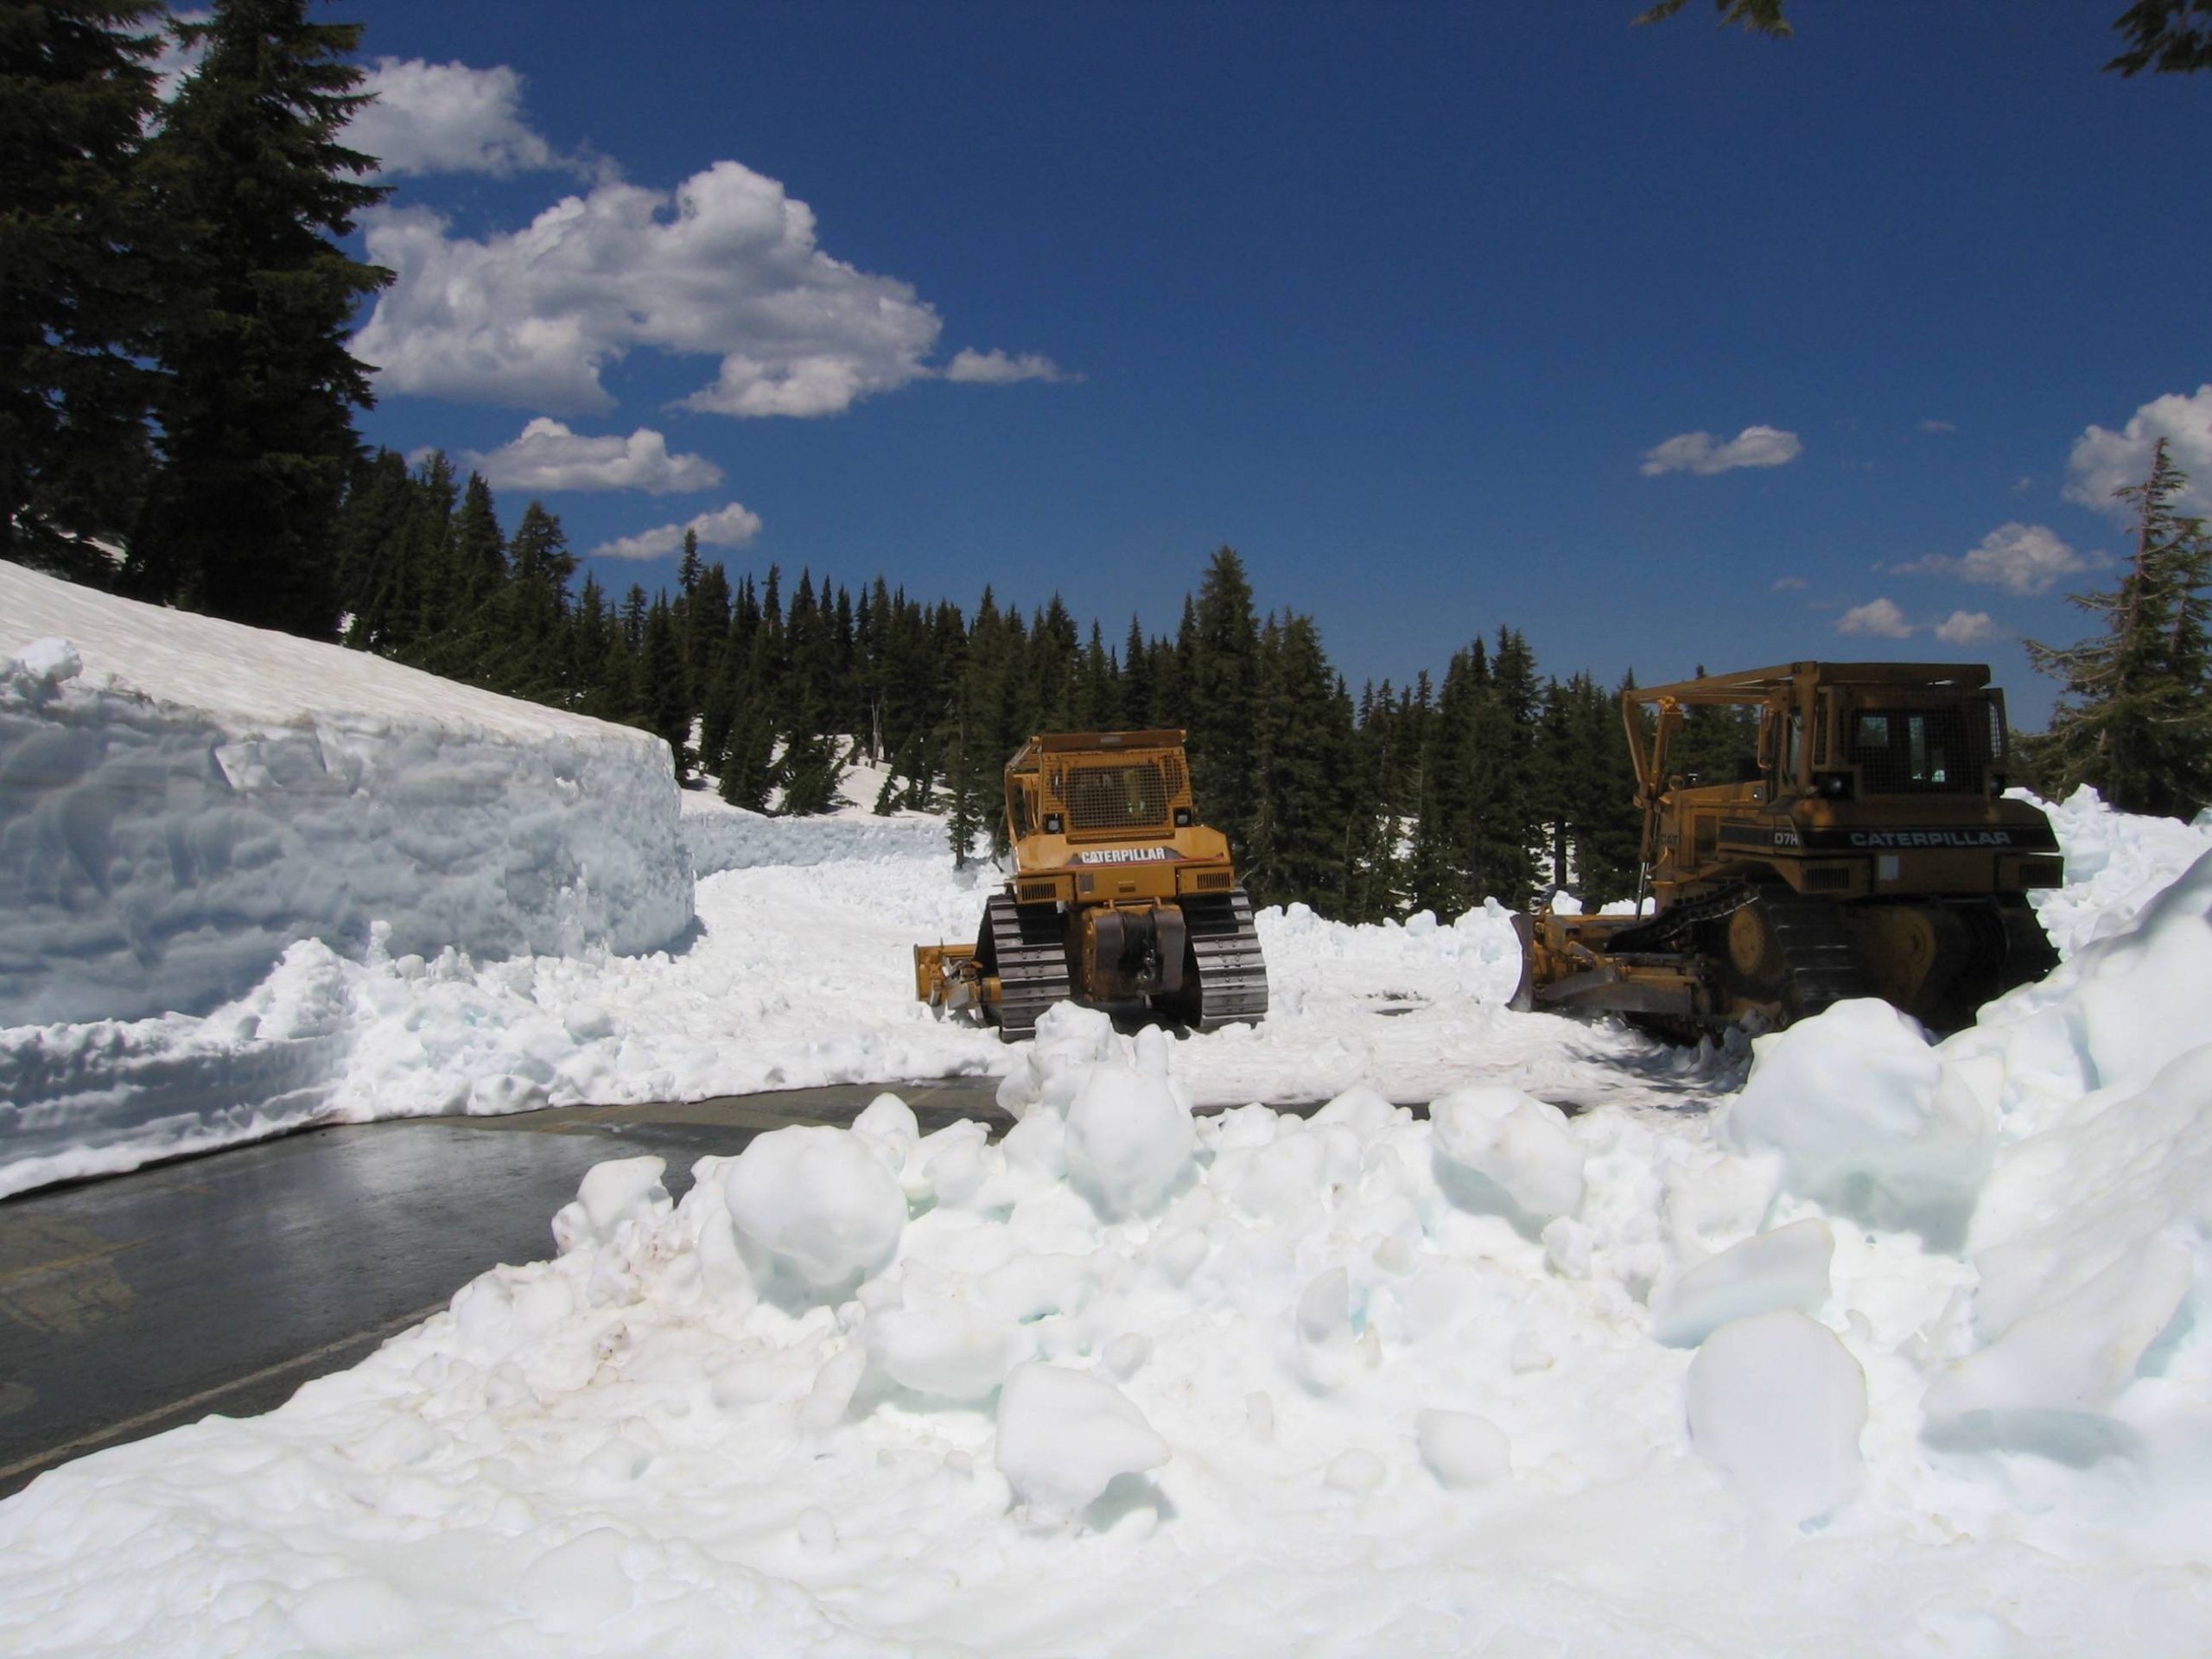 This picture was taken near the Terrace Lake Trailhead. The snow depth on the road at this location was 12 feet or more.